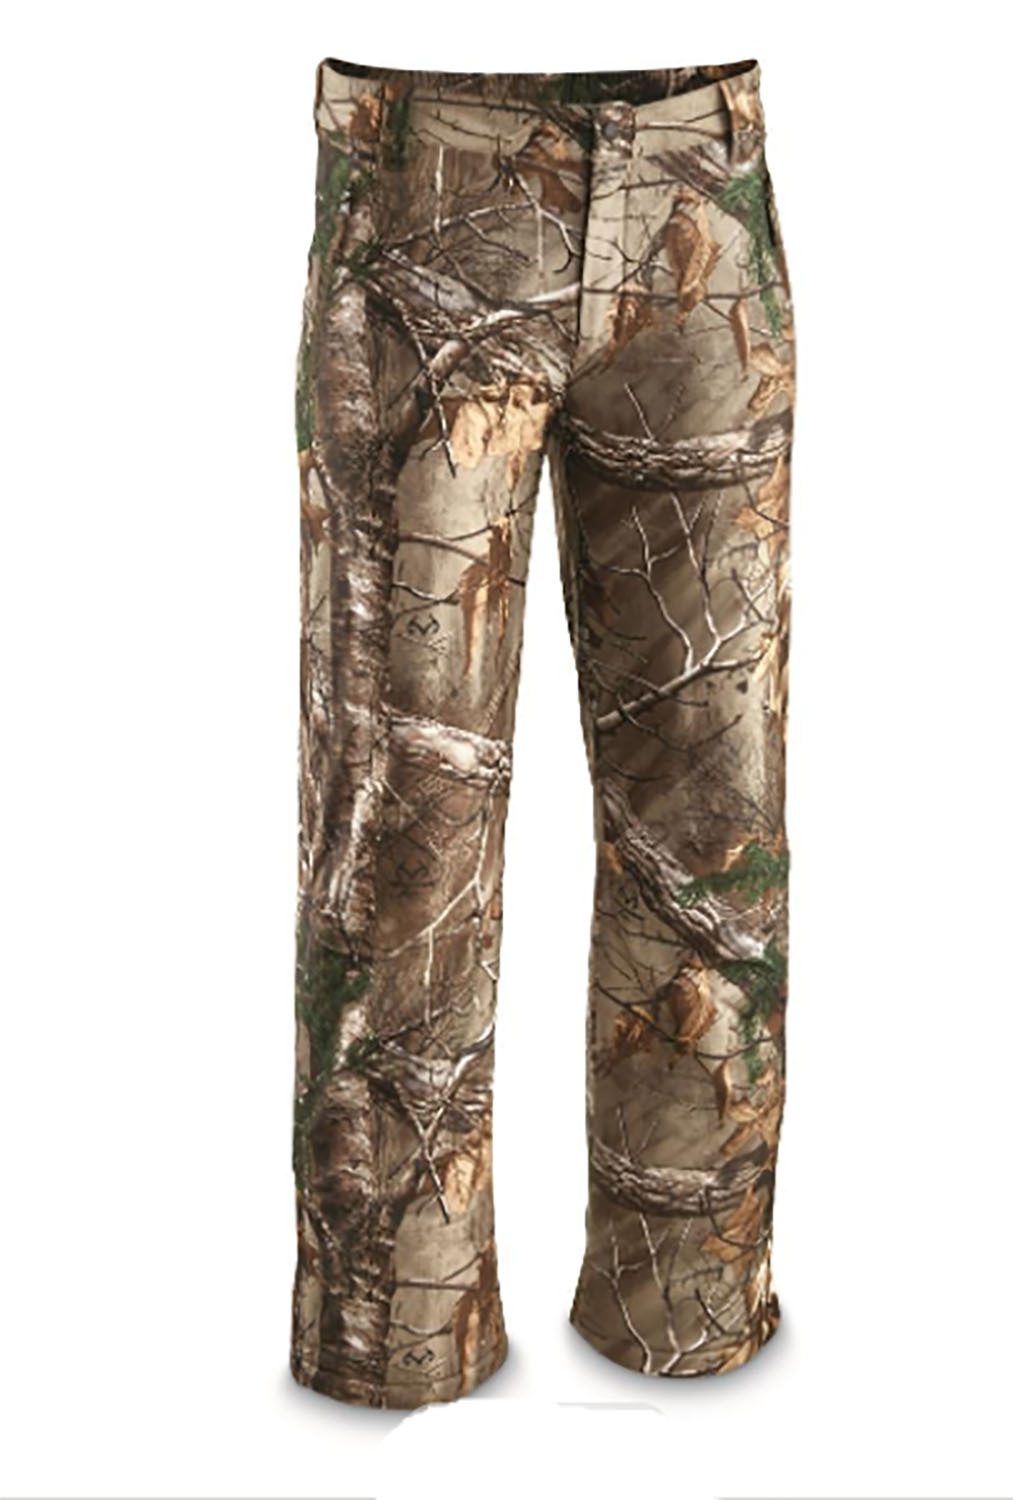 New Women's 2XL Magellan Hill Country Realtree Xtra Camo Twill Hunting Pants 